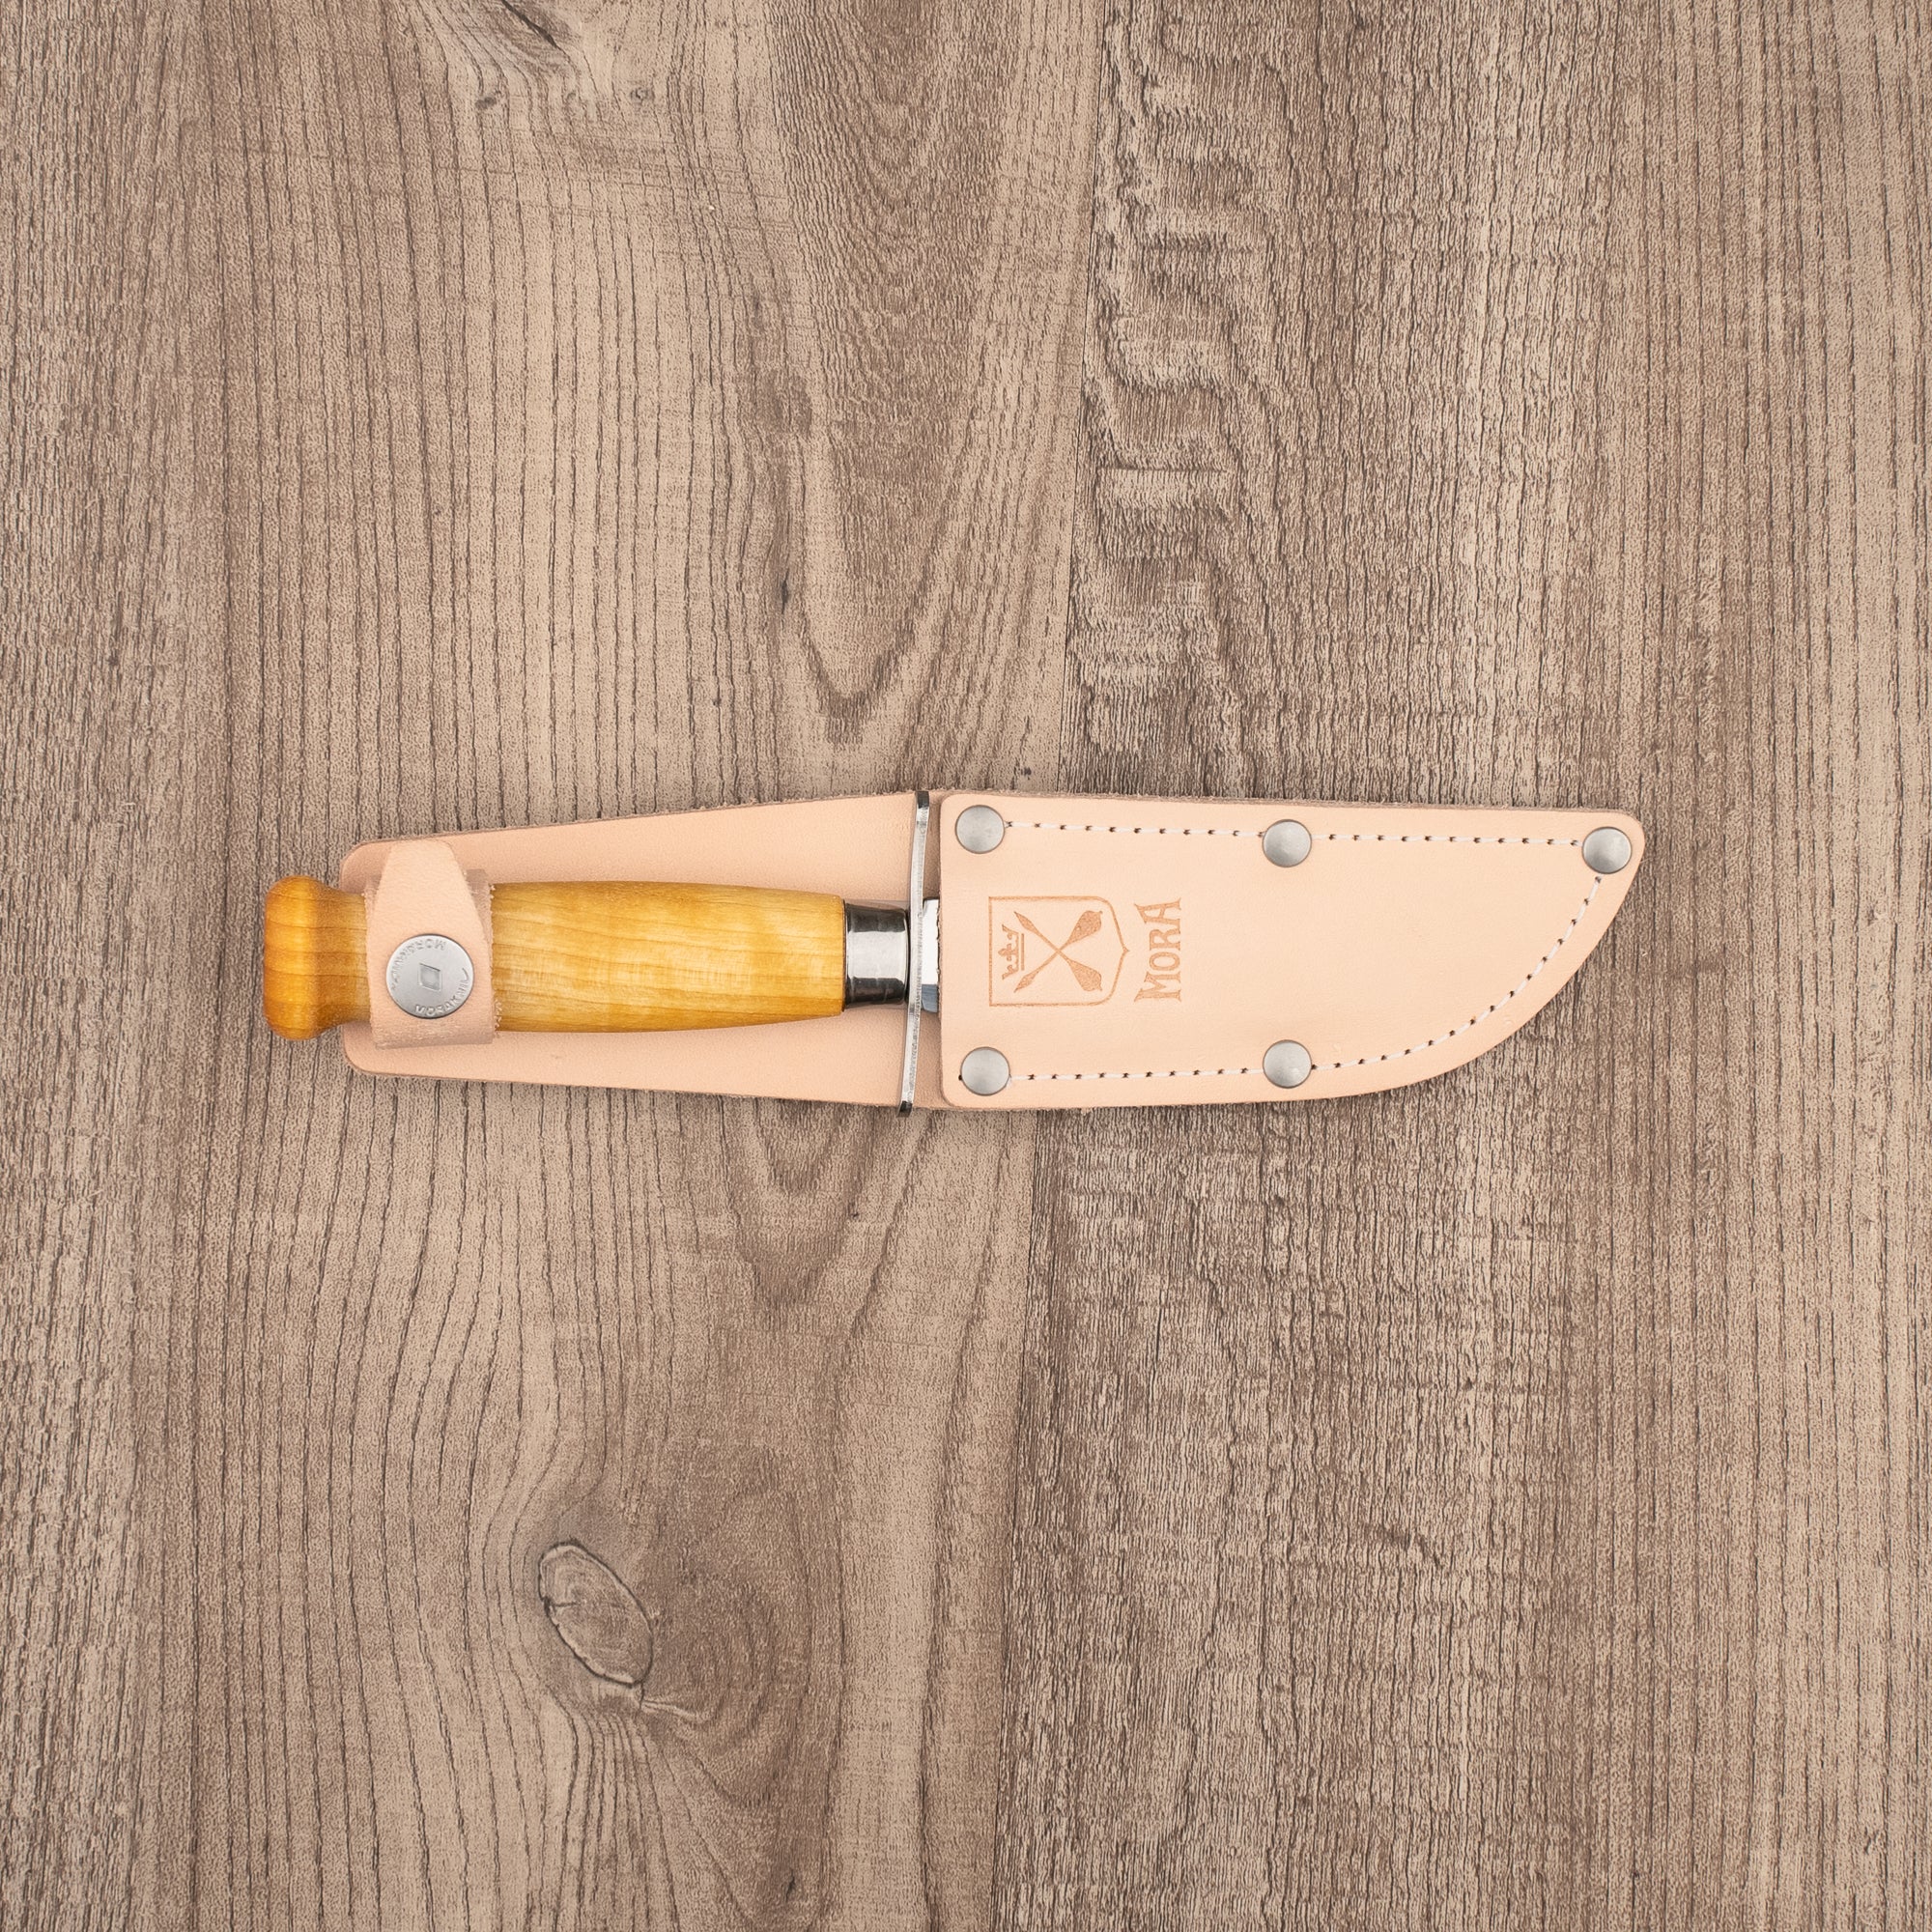 Mora Scout Camping Knife